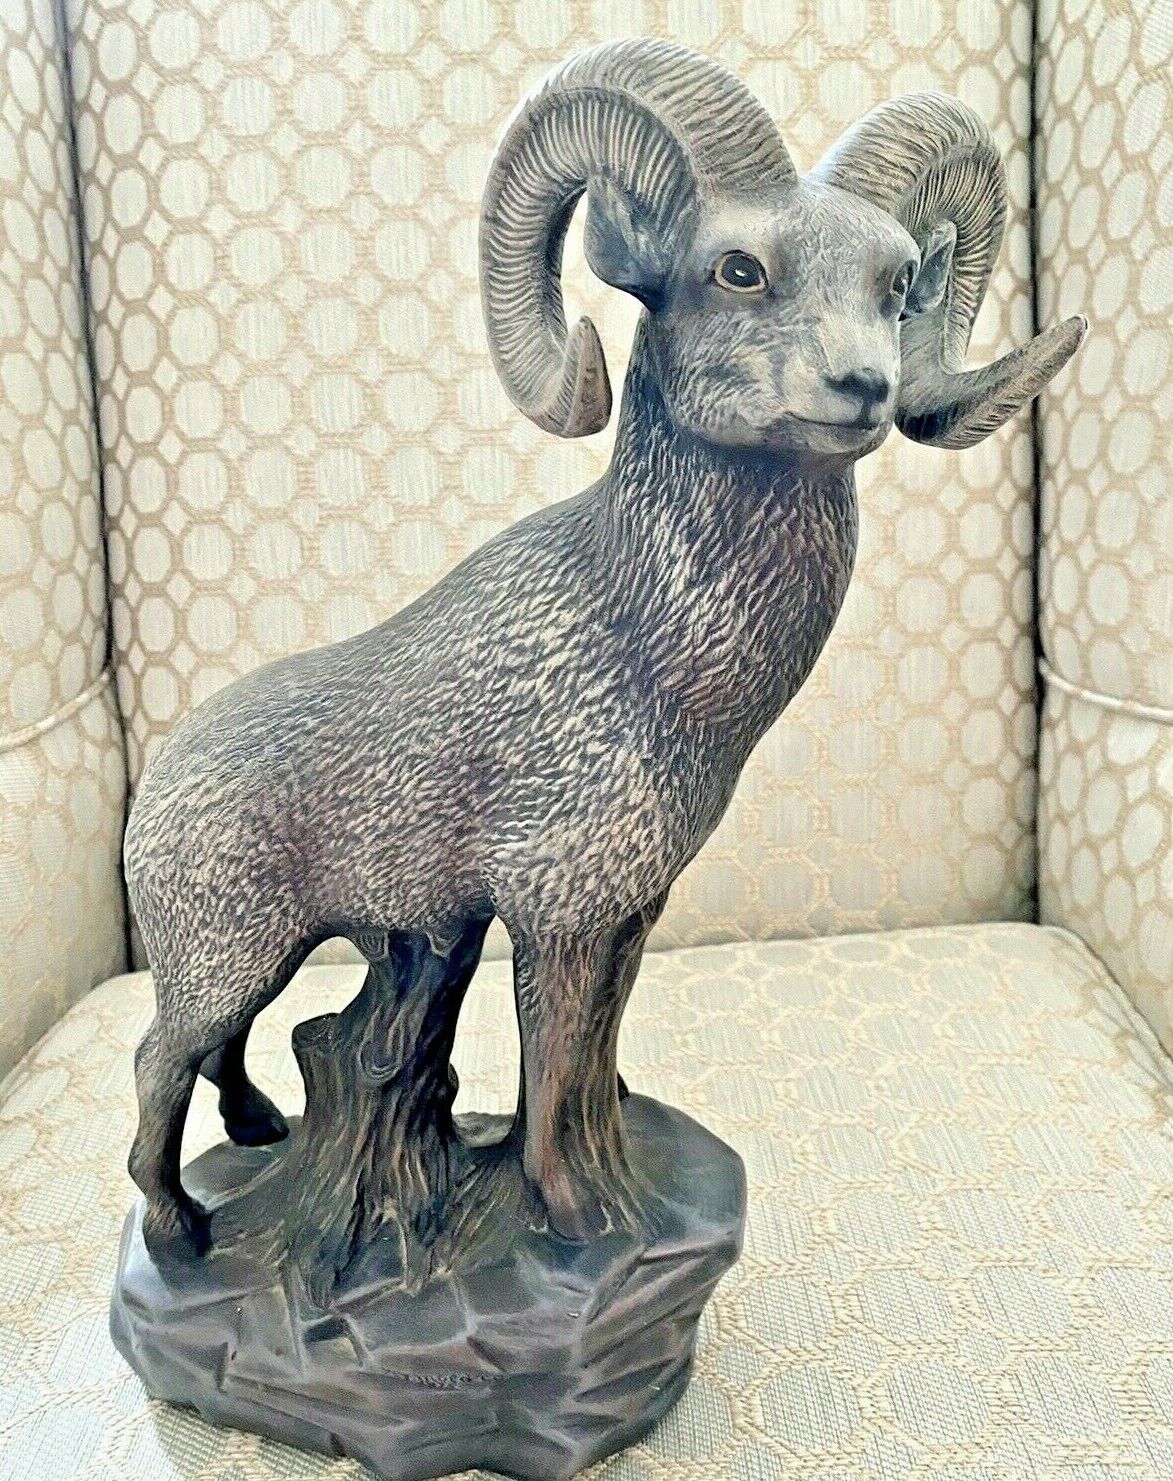 Large Ceramic RAM ROCK STATUE - KY Mold Co 1975, Outdoor Wildlife Hunting Lodge